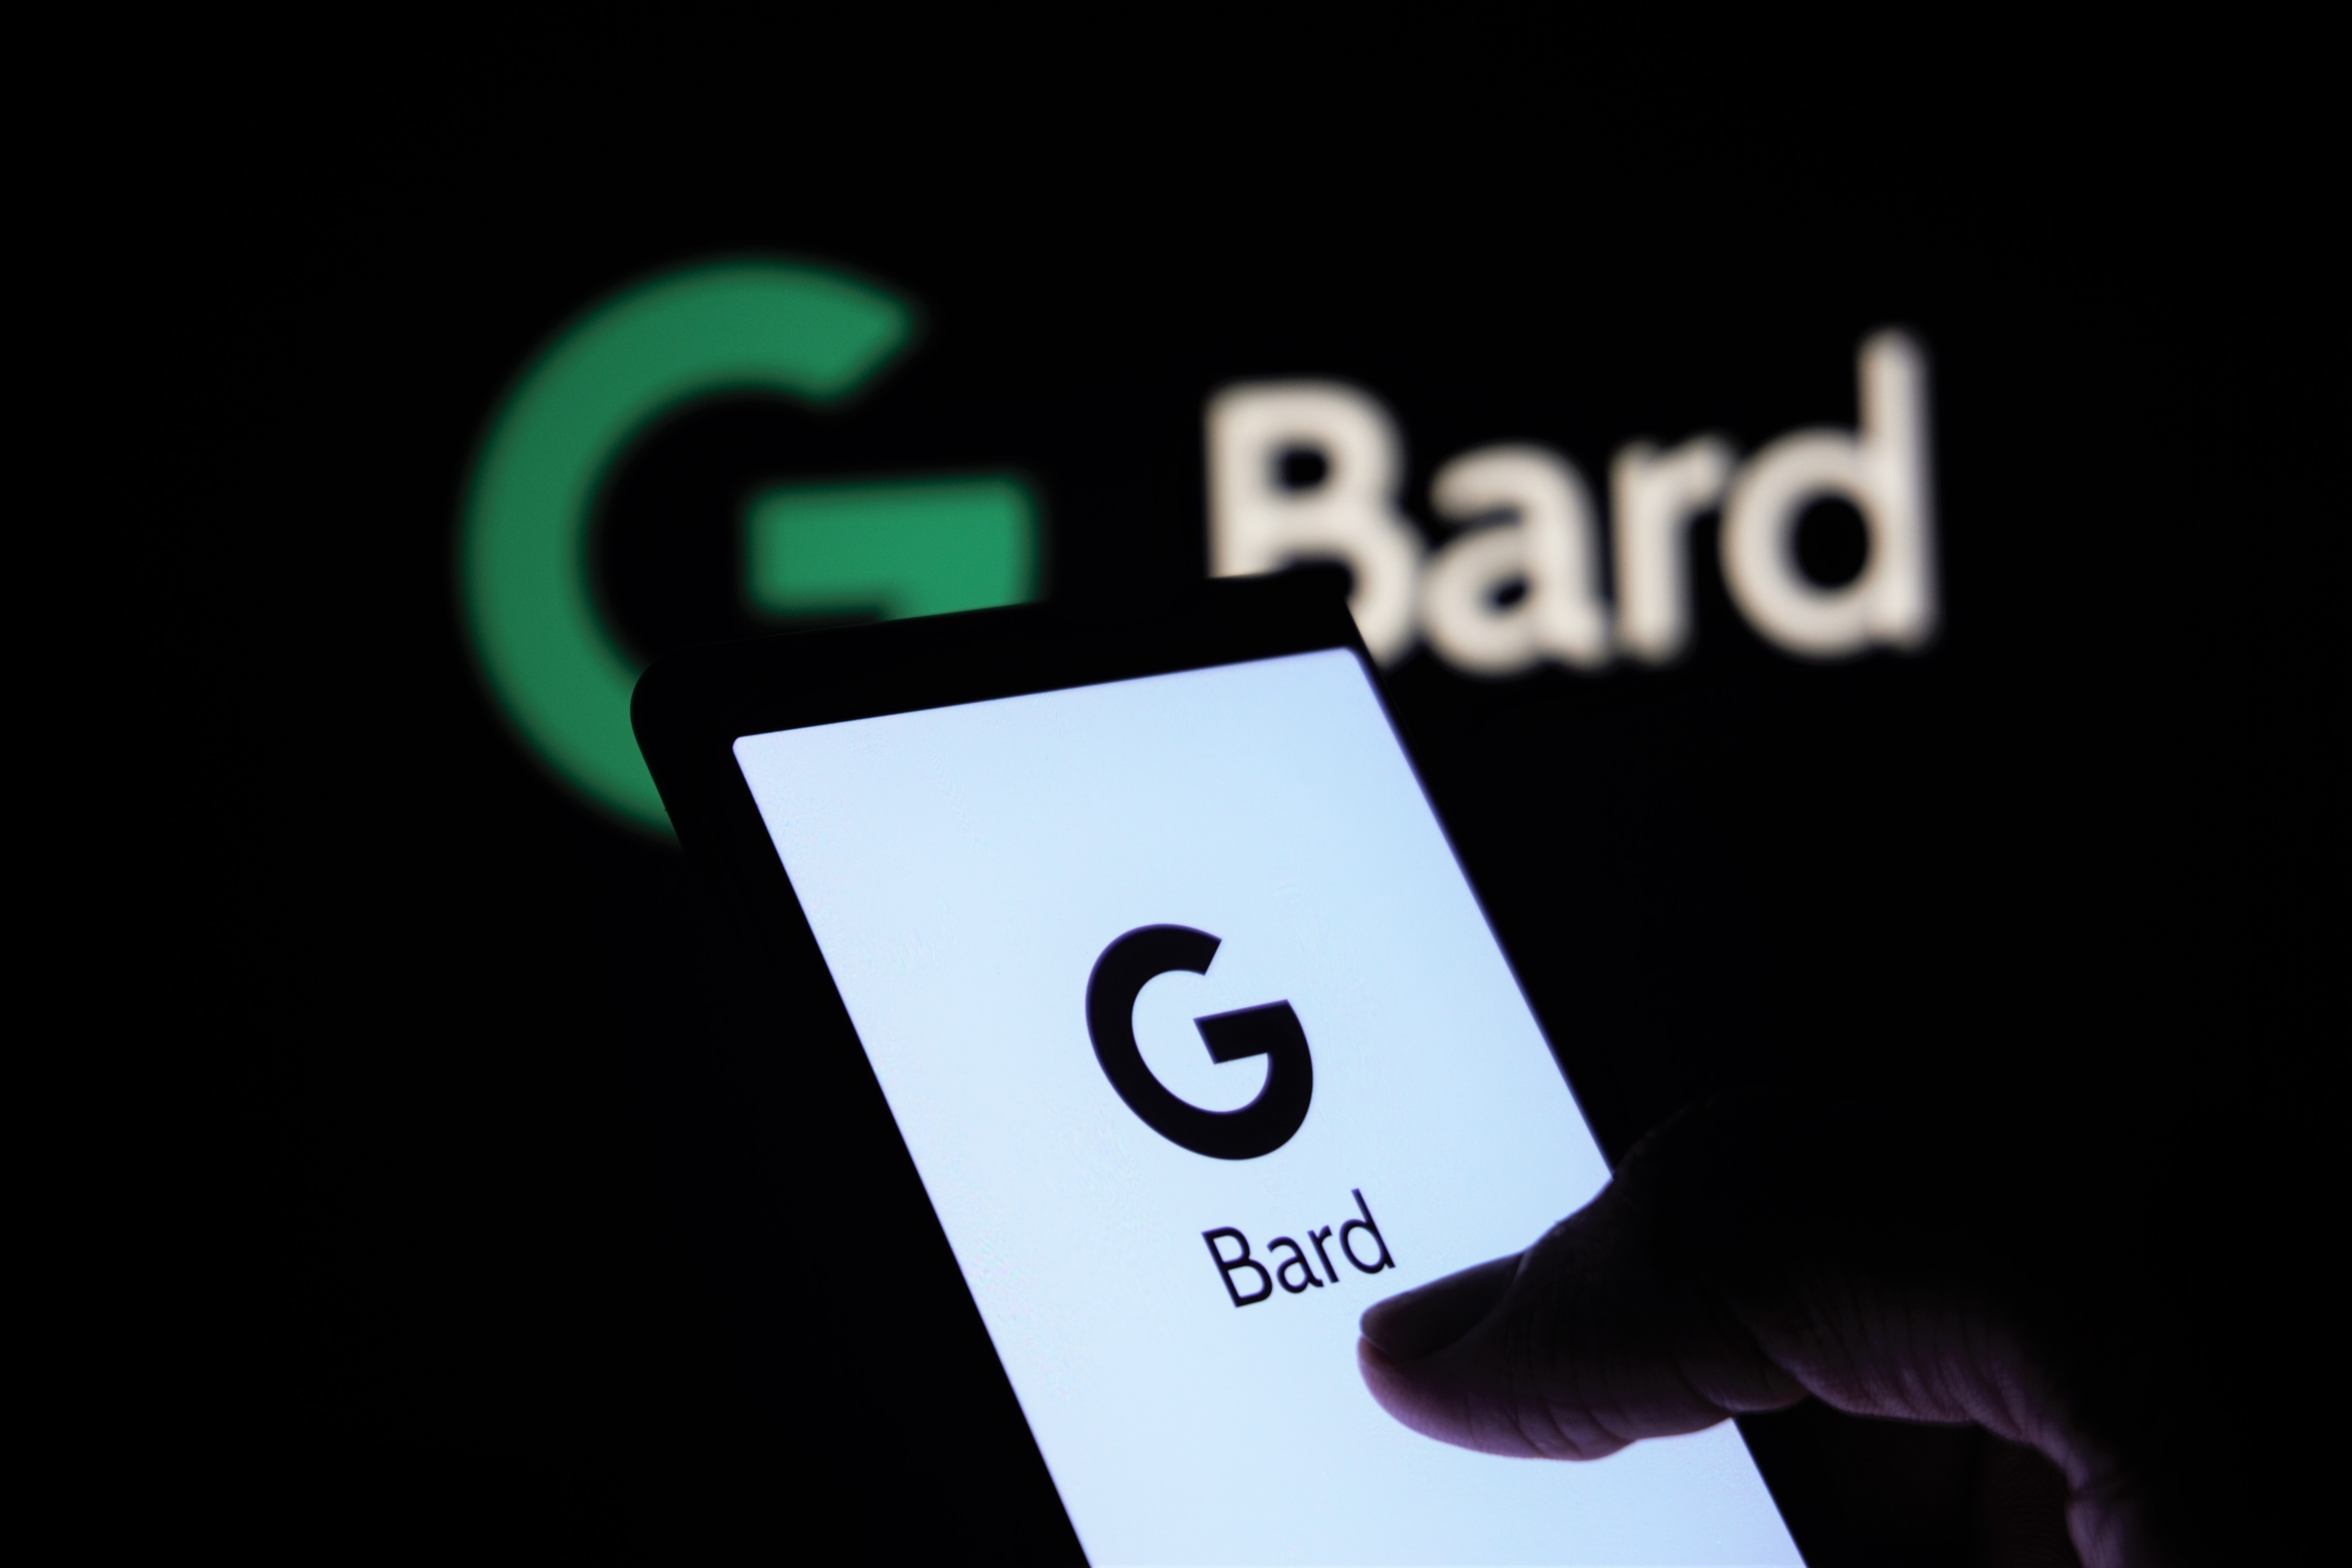 Man with smartphone that has G Bard on the sceen with G Bard sign as background; image by Mojahid Mottakin, via Unsplash.com.